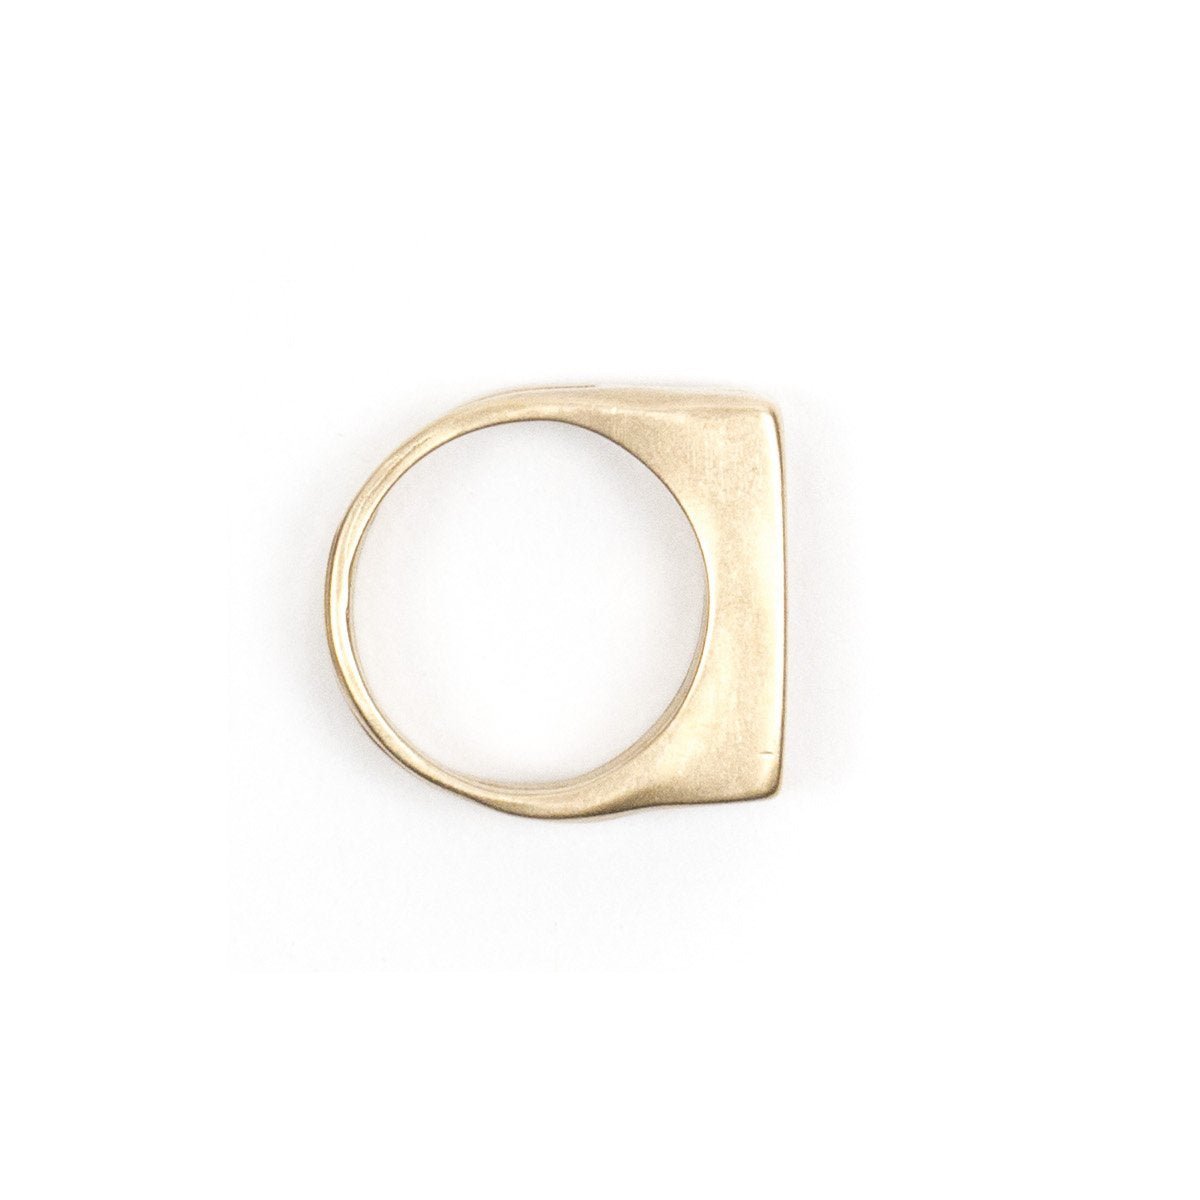 Solid, chunky, cast-bronze ring with a flat top and rectangular cutouts on the band and the top of the ring. Hand-crafted in Portland, Oregon. 